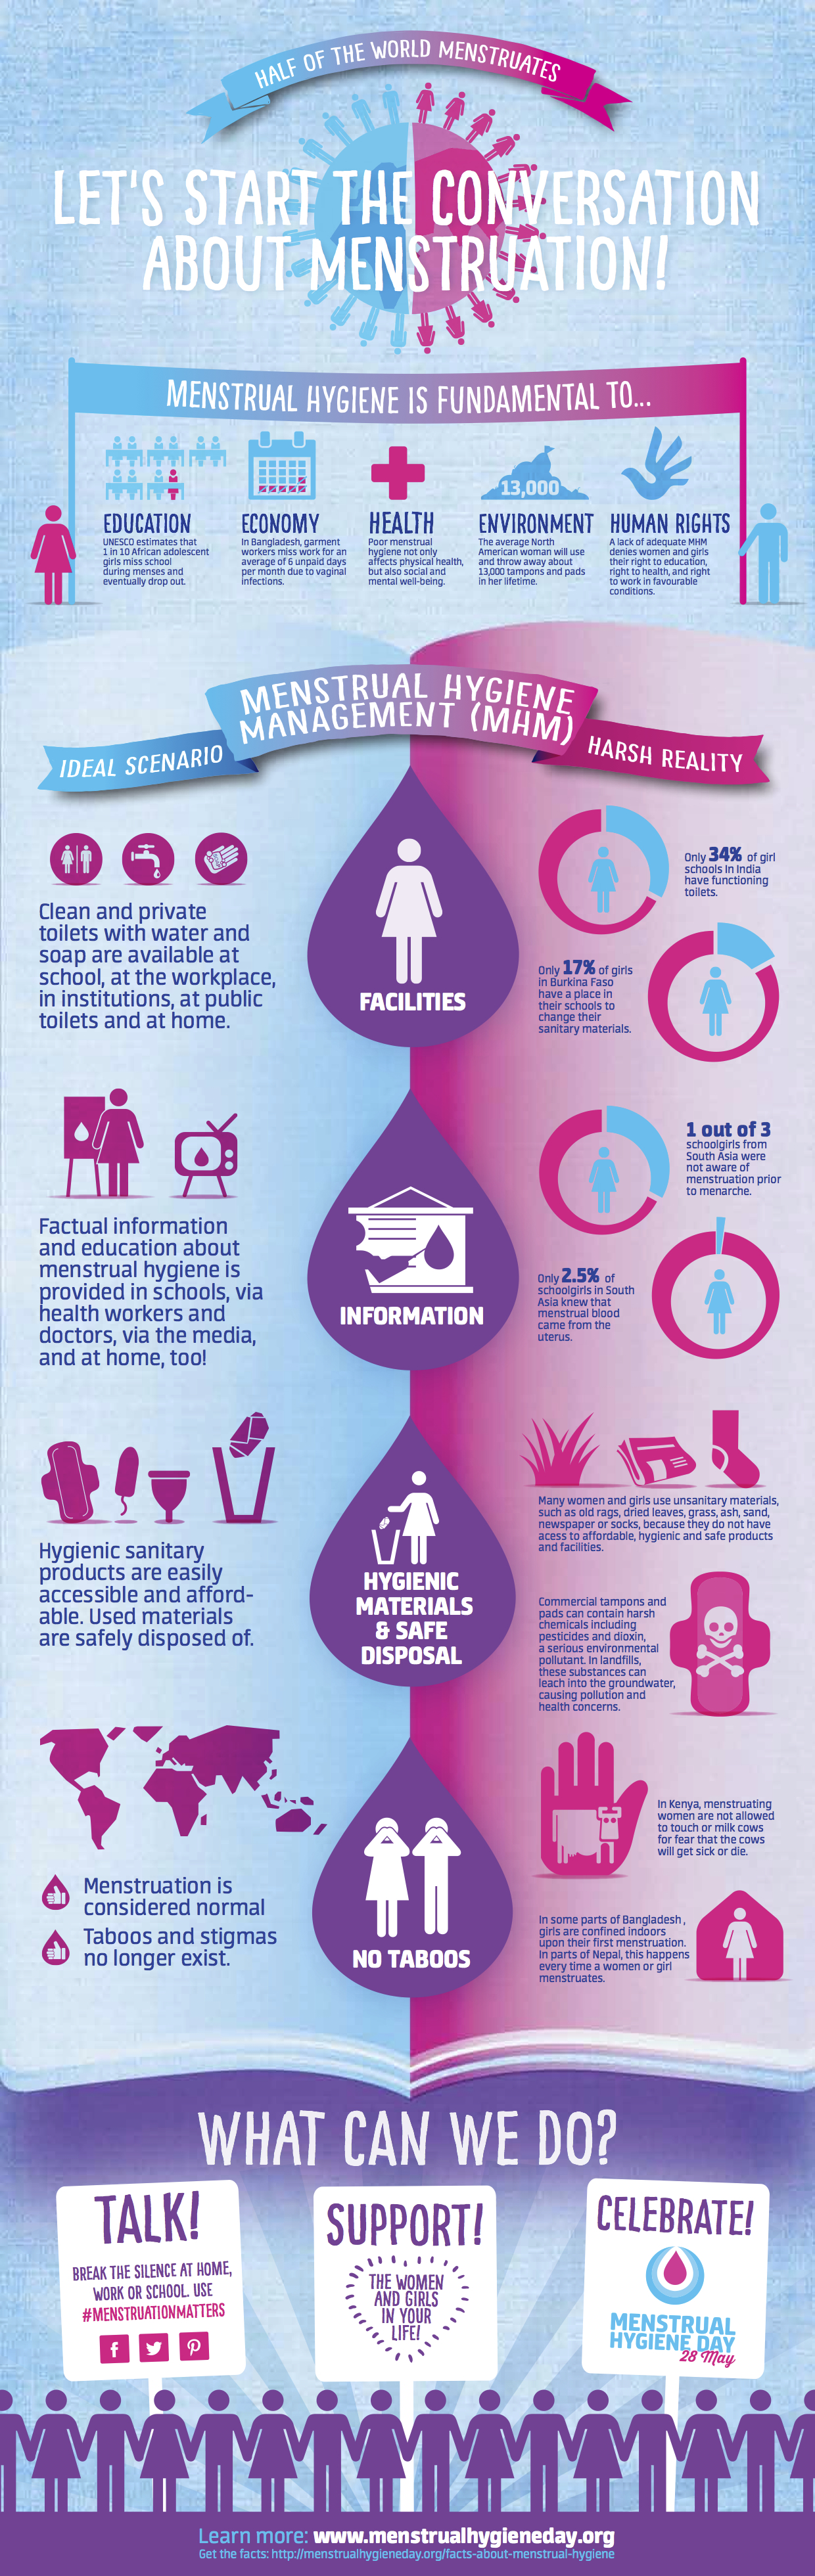 Menstrual Hygiene Day: What’s in a name? Why Menstrual Hygiene Day is called Menstrual Hygiene Day